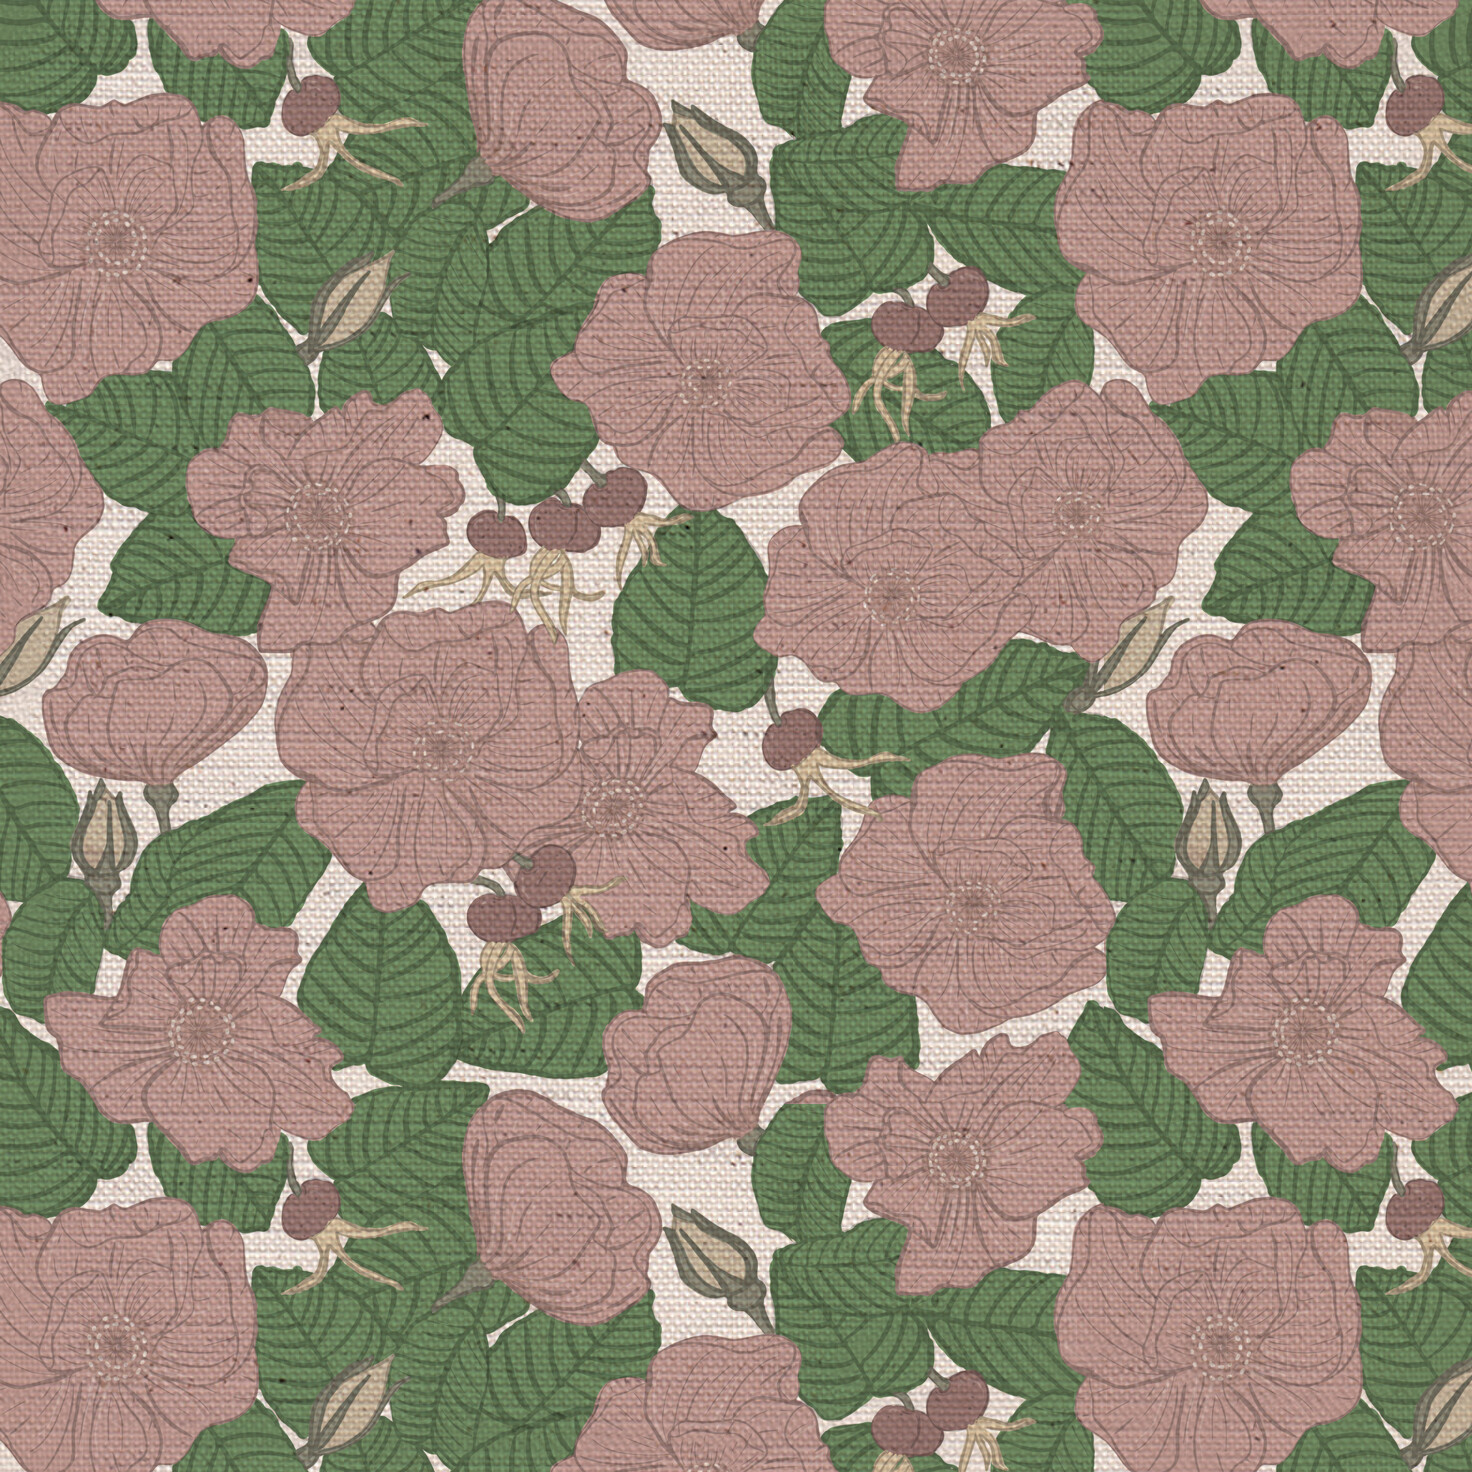 Petite Rose Garden Fabric in Pink on Natural Background